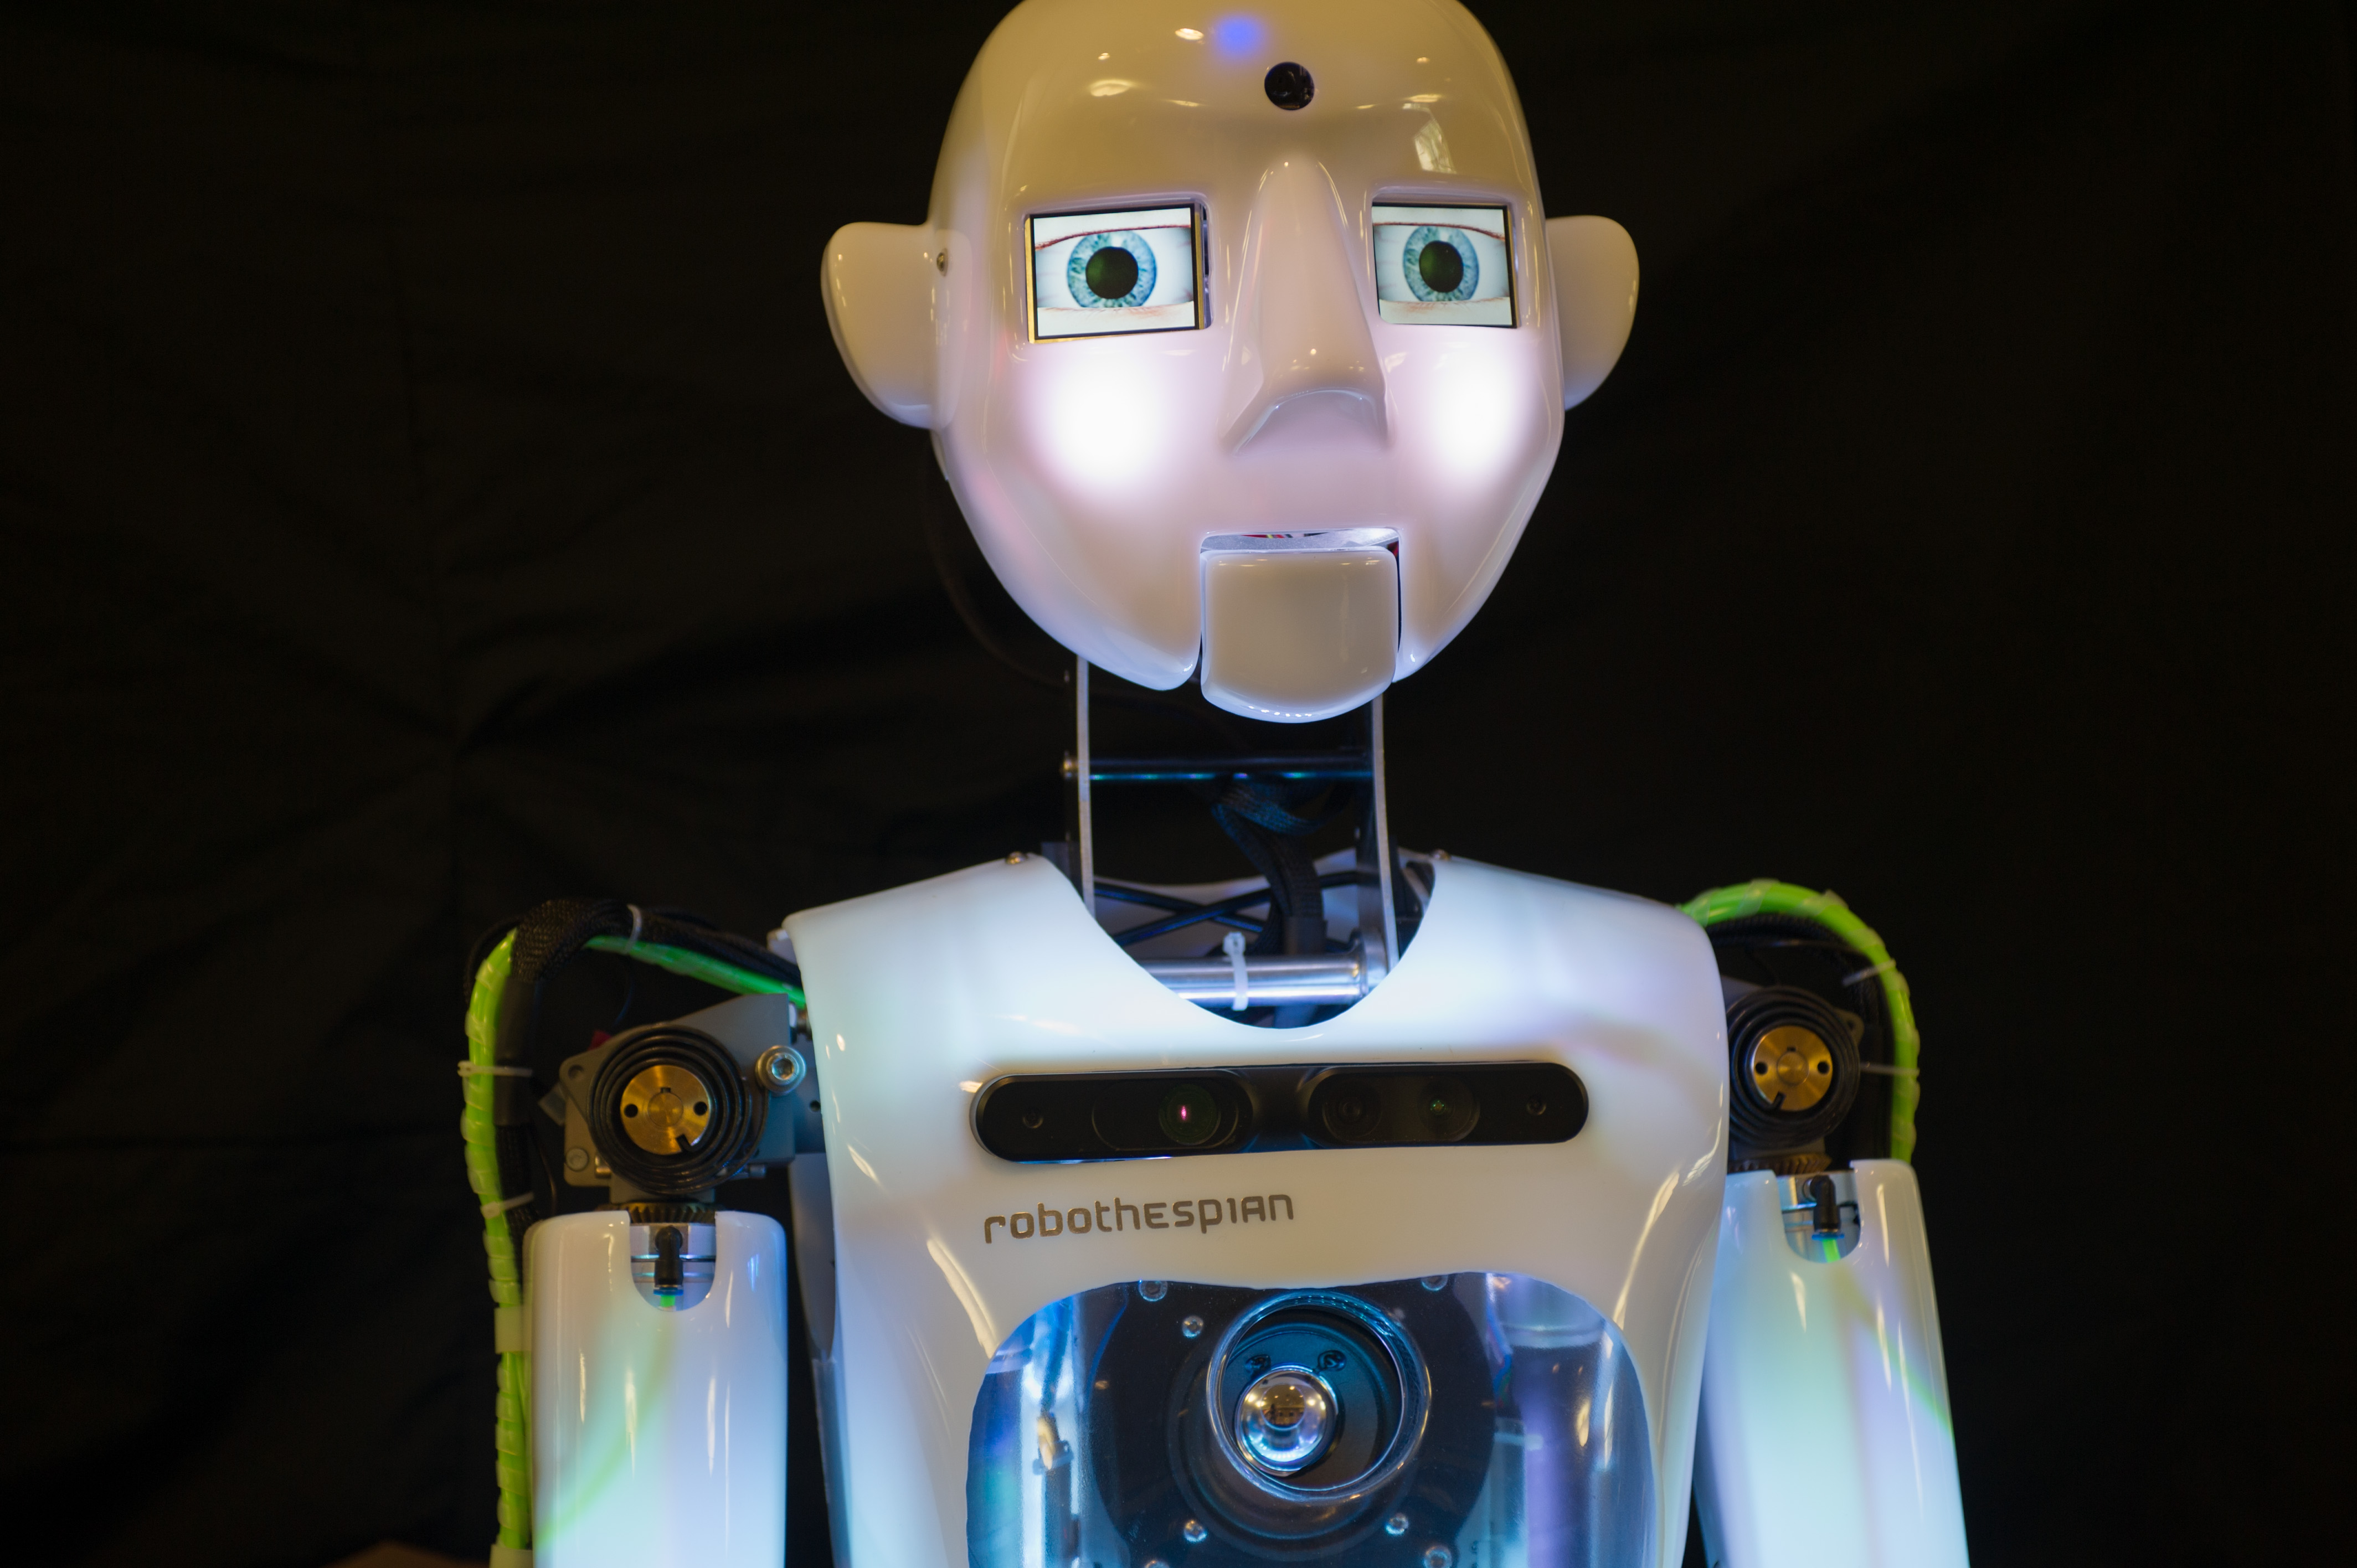 RoboThespian, a humanoid created in the United Kingdom, is designed for human interaction in a public environment. It is fully interactive and multilingual. It is one of several robots on display at Georgia Tech during the Humanoids 2013 conference.